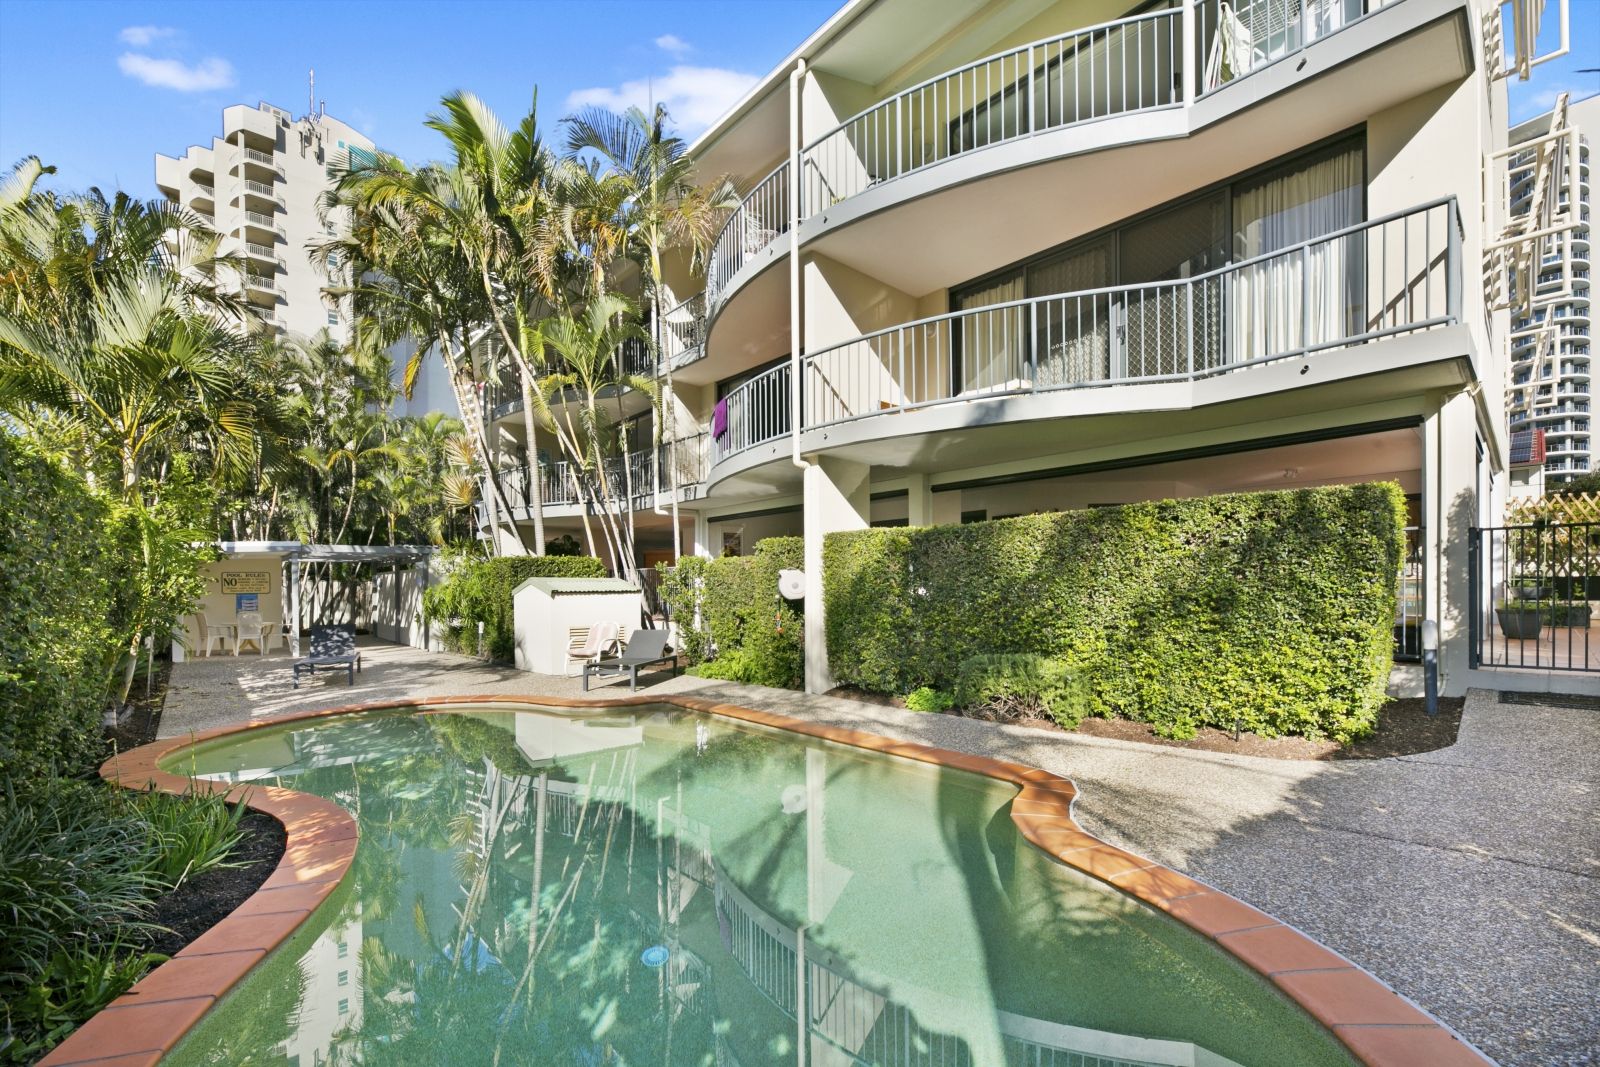 2 bedrooms Apartment / Unit / Flat in 4/21-23 Woodroffe Ave MAIN BEACH QLD, 4217